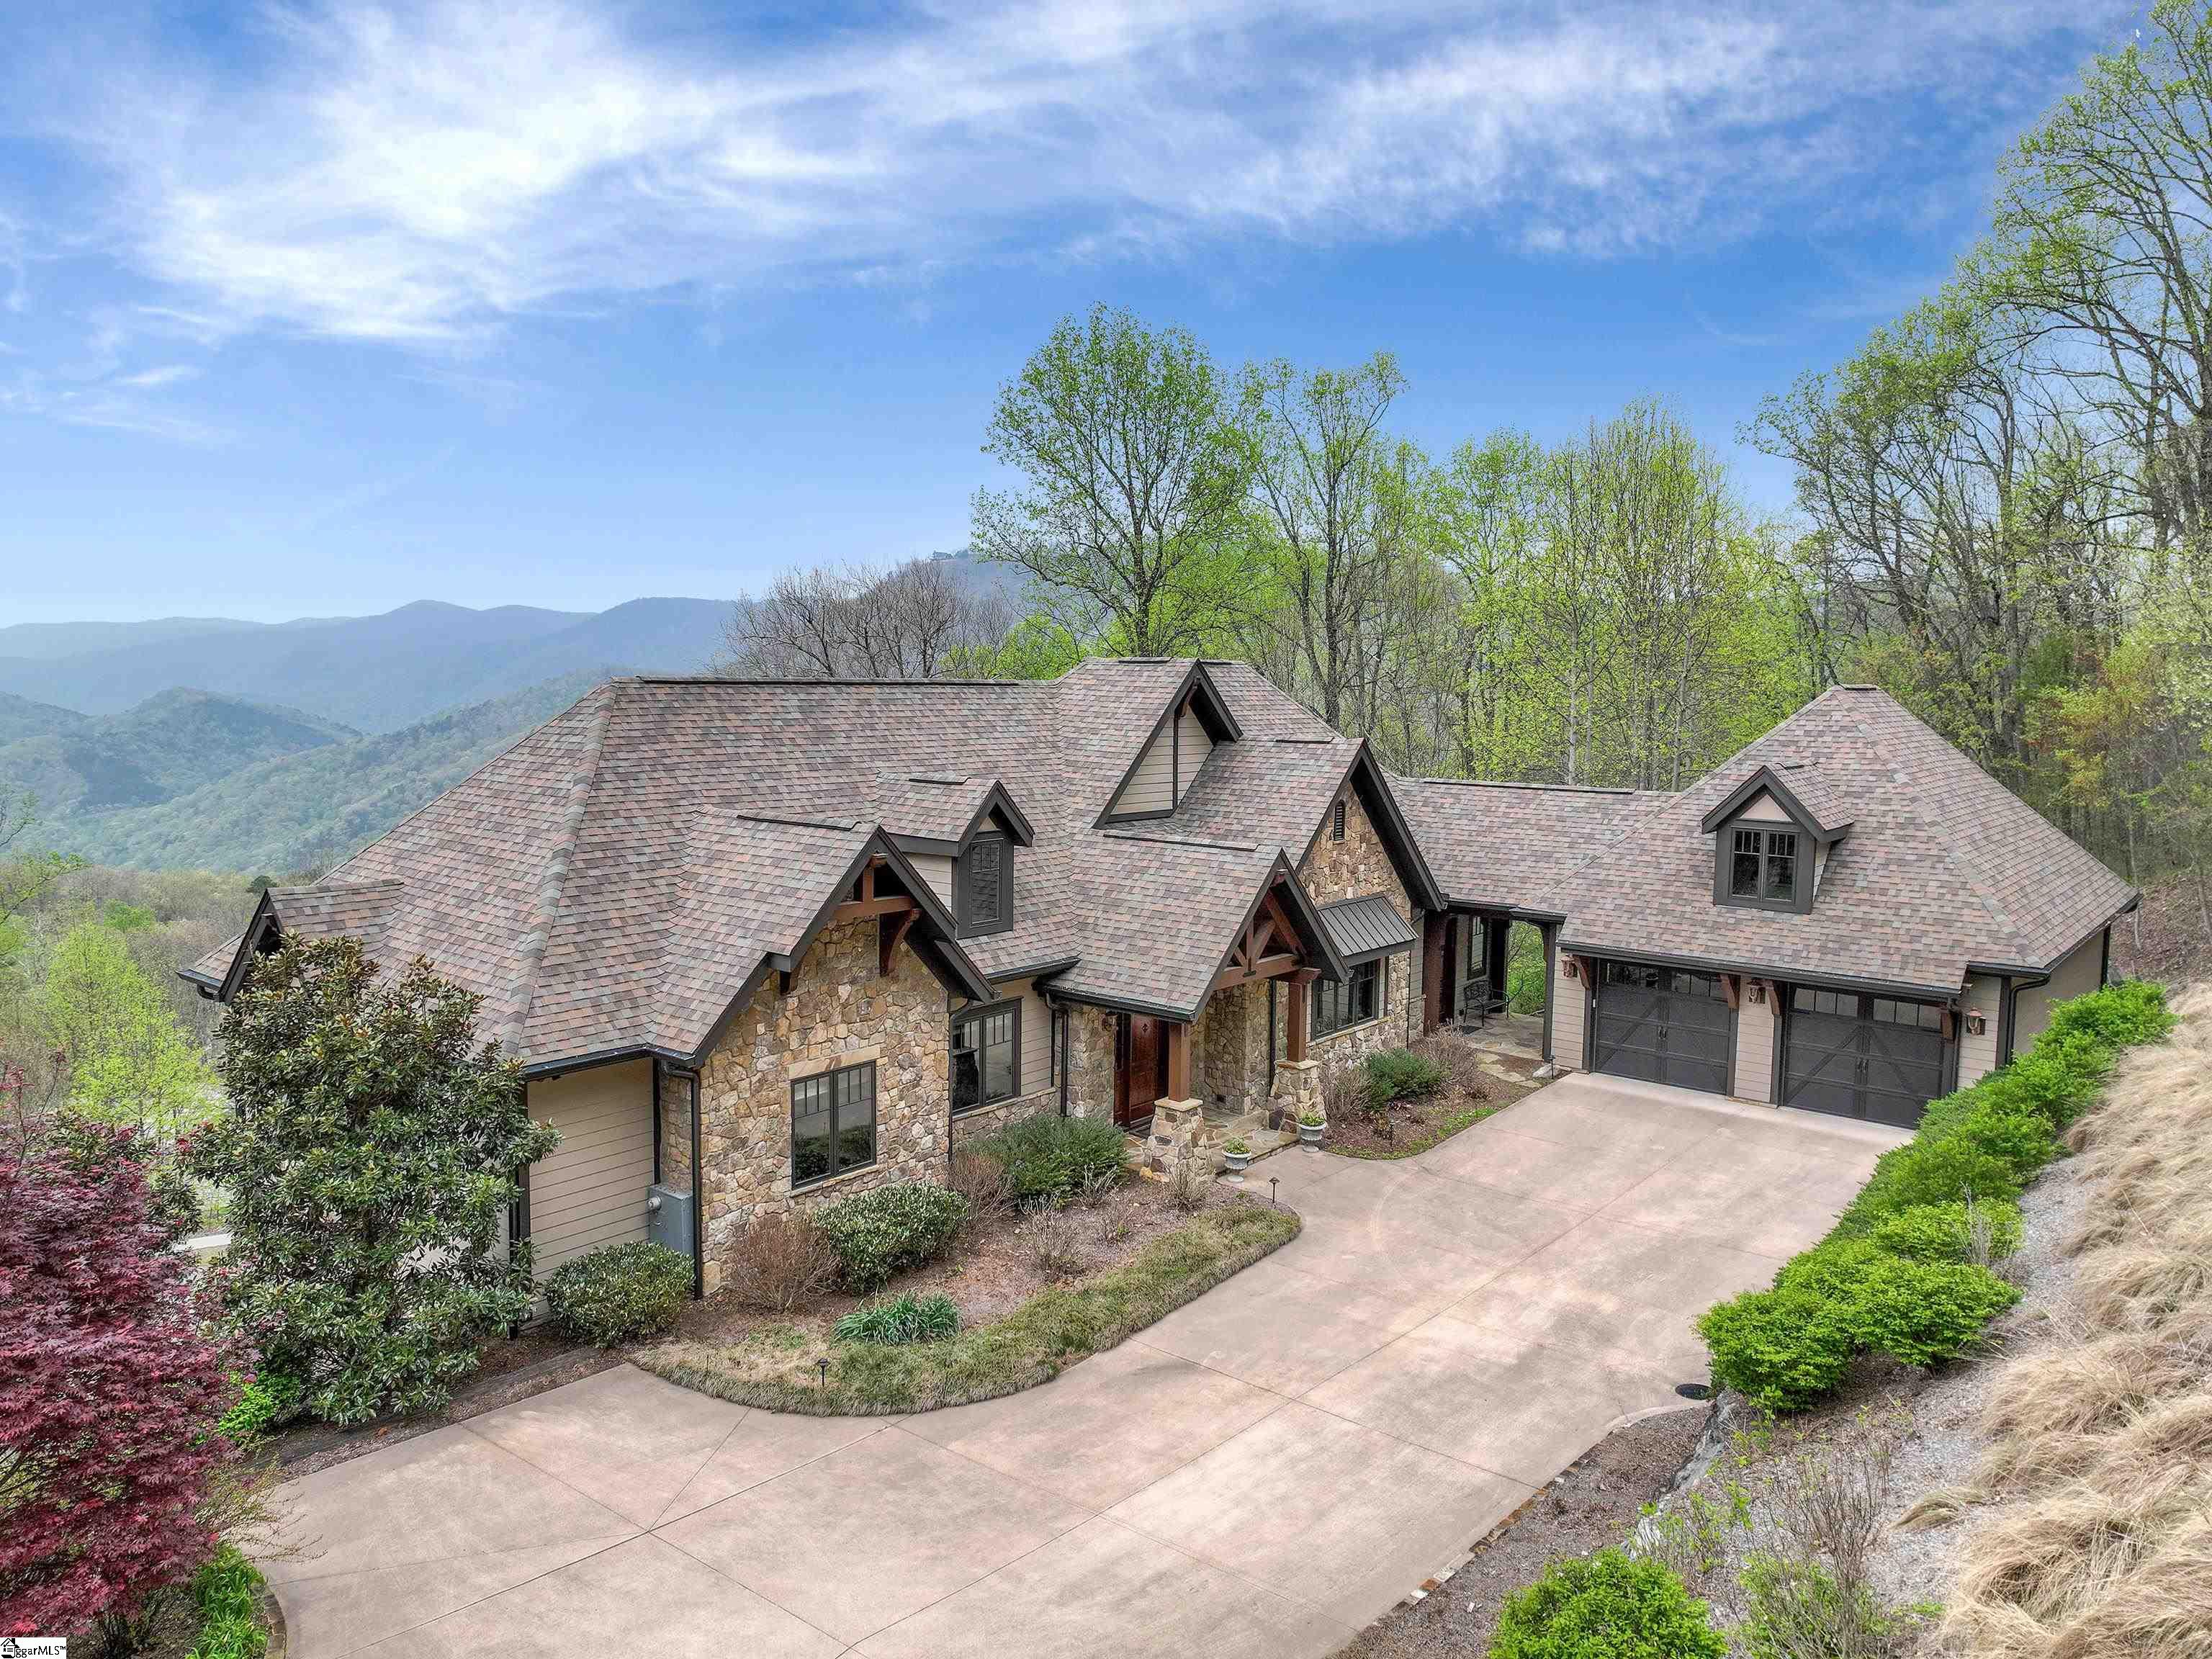 Nestled in the mountains just minutes from Greenville, SC, make yourself at home in the comfort and convenience of The Cliffs Valley gated golf and wellness community.   Ideally sited on 3.33 acres, this relaxing mountain home is rich in quality and design and features some of the most expansive, ridgeline vista views you’ll find in the Blue Ridge mountains.  Located at an elevation of 2,400 feet on a beautifully landscaped lot, the home features concrete composite siding and handsome stone exterior with a welcoming flagstone entry.    Entering the home, you are immediately captured by the impressive attention to detail in the elegant but rustic finishes.   The main level is laid out gracefully with the primary suite on one wing and an open floor design with the kitchen, dining area, and great room all combining seamlessly into a warm and welcoming space for entertaining guests. The great room is stunning with its stacked stone gas fireplace, cedar beams, cathedral ceiling, and an abundance of tall windows to allow an infusion of light throughout the day.  Adjacent to the dining area, the spacious cook’s kitchen is fully equipped with granite counters and a chef’s island with a built-in sink, high-end appliances, including a four-burner gas cooktop with a griddle, two dishwashers and ceiling-height custom knotty alder cabinetry. Connected to the kitchen through a Dutch door is a large, oversized laundry room with quartz countertops that includes a built-in office area.    Wide doorways throughout the house and low-rise steps are part of the carefully thought-out planning that allow “aging in place.”      From the great room, a hallway leads you to the primary bedroom that features an elegant tray ceiling, large ‘his and hers walk-in closets, and a spa-like bathroom that includes dual high-end granite vanities, connected by a makeup vanity, a copper soaking tub.  Both the oversized walk-in shower and water closet accommodate wheelchair access.        The lower level is well-fashioned, while also warm and comfortable for extended family or overnight visitors.   Entertain in the recreation room that can double as a “man cave” with a wet bar/kitchenette and includes custom built-in shelving for a flat-screen TV.  Two generous guest bedrooms are connected by a unique ‘Jack and Jill’ bathroom design that includes two separate spaces with their own vanities and toilets for each of the guest bedrooms with the shower in between. Work out at home in the exercise room that walks out to the private patio. For someone wanting to add an additional bedroom and bath, the exercise room and adjacent powder room could potentially be converted, utilizing the deep unfinished space behind them. The substantial unfinished space on the lower level is climate controlled and provides ample room for storage and easy access to the home’s mechanical systems. The house is double insolated keeping heating and cooling expenses to a minimum.    Outdoor living spaces come in abundance and feature some of the best spots to take in the views that range from the southeast to the west.  From the main level deck that includes a fireplace and built-in grill, you will enjoy stunning sunsets with the crimson glow of the sun setting over the mountains at dusk.  In the heart of the view are the majestic mountain peaks of Table Rock and Pinnacle Mountain.   Below the deck is a comfortable patio space that is easily accessed from the lower-level great room and guest bedrooms.      Surround sound audio with ceiling-mounted speakers is found in most living spaces and also in the primary bedroom.   The oversized garage with an epoxy-coated floor is both extra-long and wide, allowing room for up to 4 vehicles and storage for a high-end portable generator that conveys.   A Club membership at The Cliffs is available with this property giving you access to all seven communities.